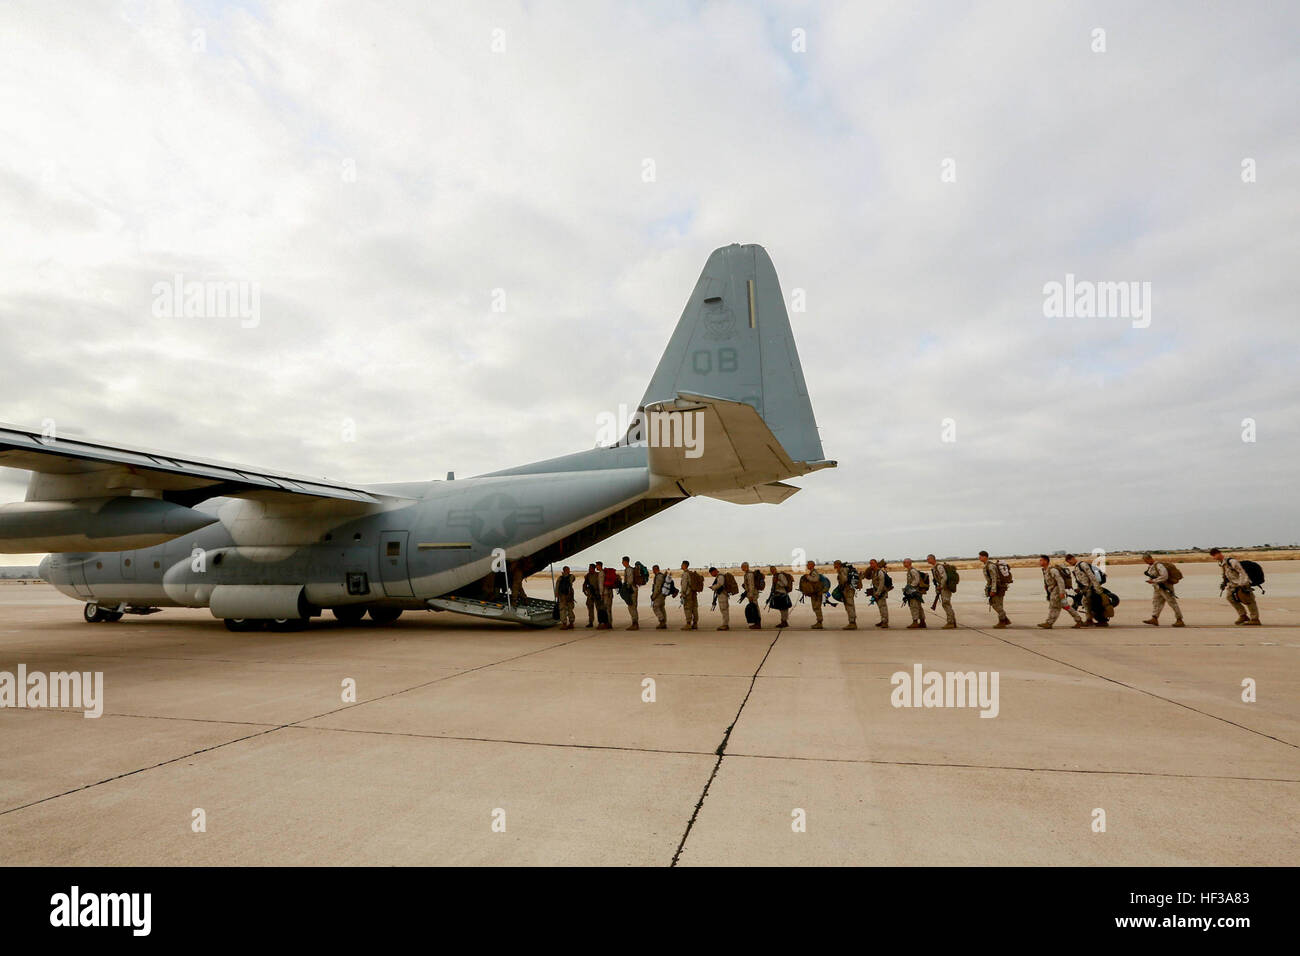 U.S. Marines with India Company, Battalion Landing Team 3rd Battalion, 1st Marine Regiment, 15th Marine Expeditionary Unit, board a KC-130J Hercules aboard Marine Corps Air Station Miramar, Calif., May 13, 2015. The Marines of BLT 3/1 head to Hawaii for sustainment training before boarding the USS Anchorage (LPD-23) for their deployment through the Pacific and Central Command area. (U.S. Marine Corps photo by Sgt. Jamean Berry/Released) Leaving on a jet plane, 3-1 Marines depart for Hawaii 150513-M-GC438-047 Stock Photo